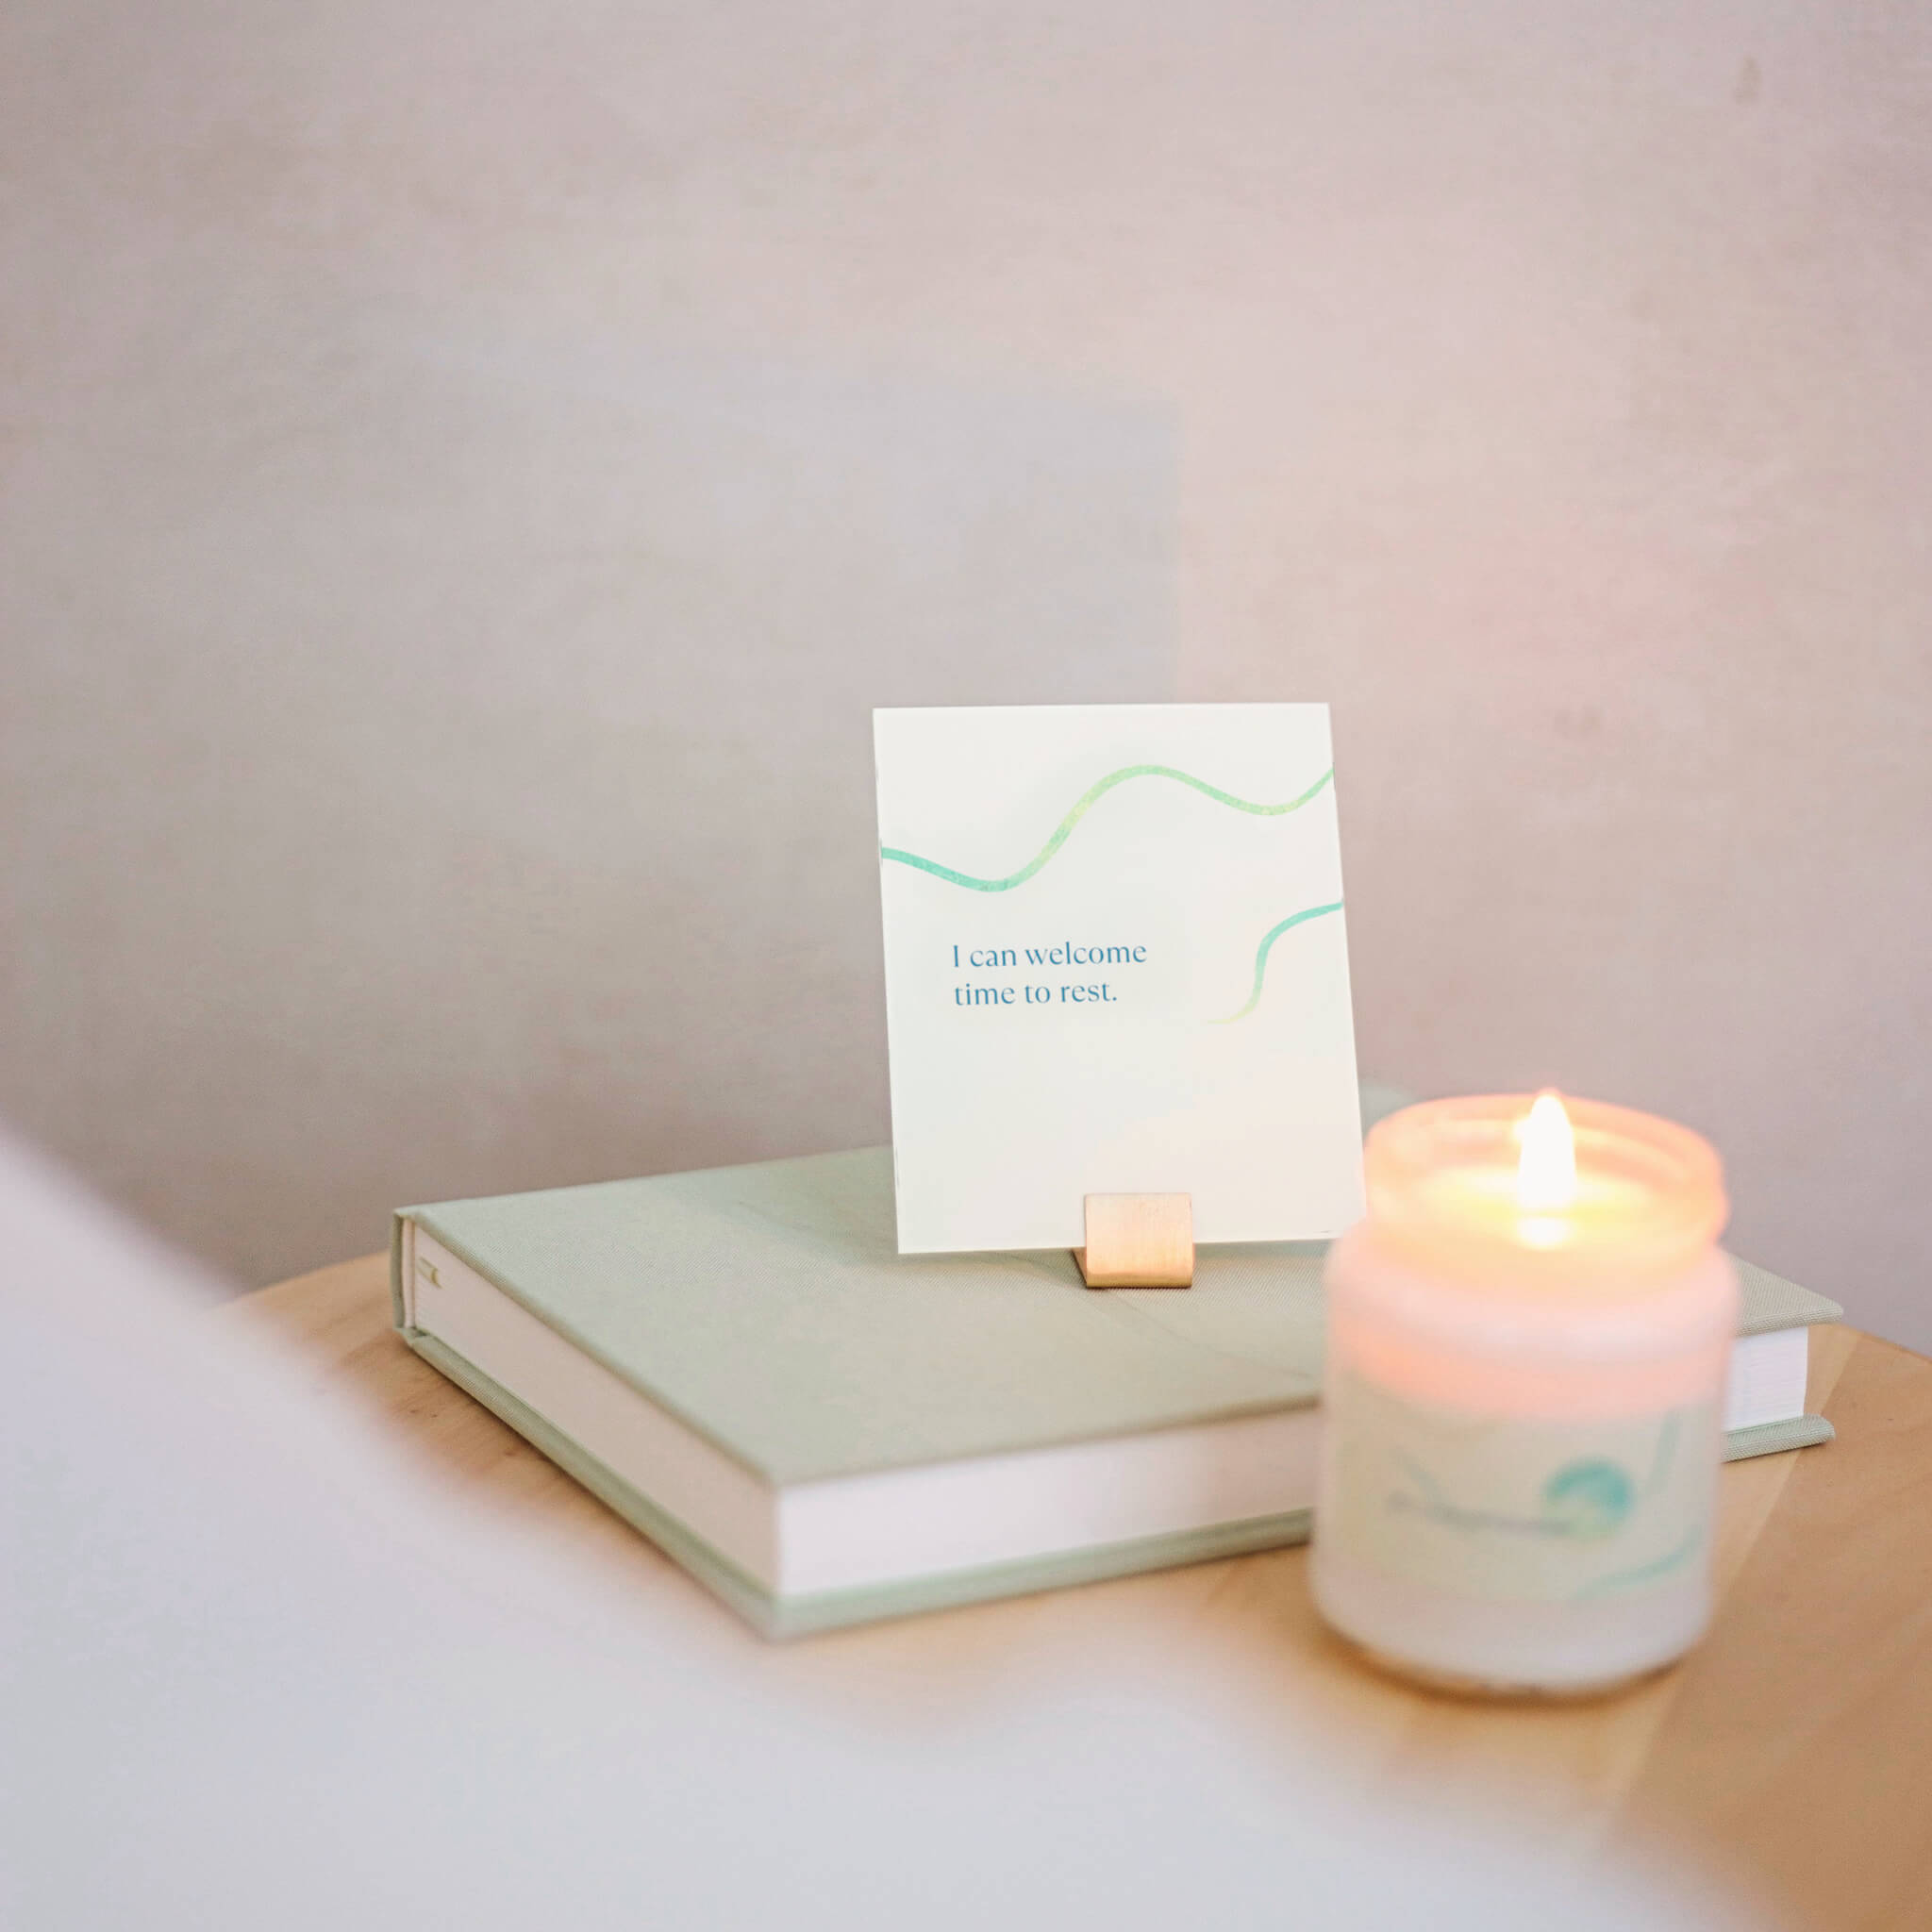 give yourself kindness affirmation card, journal and candle